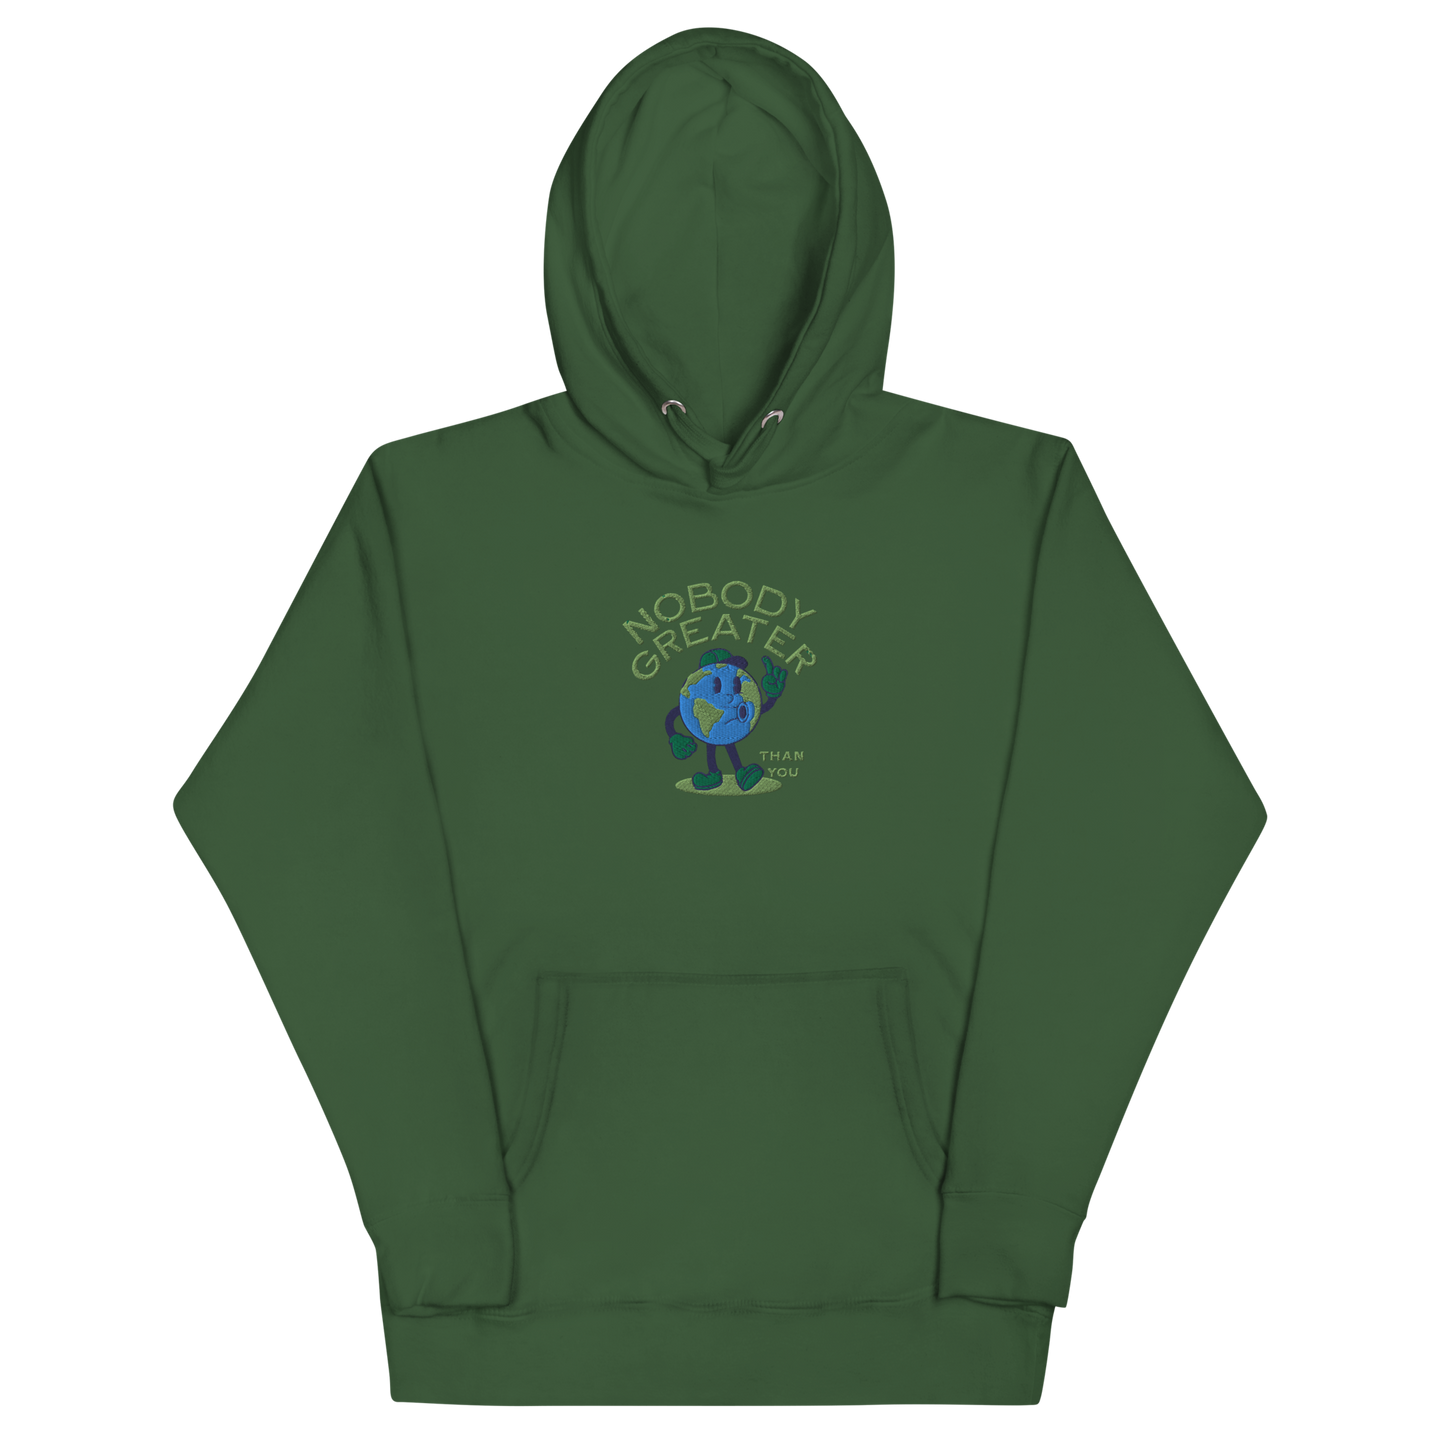 Nobody Greater Embroidered Hoodie